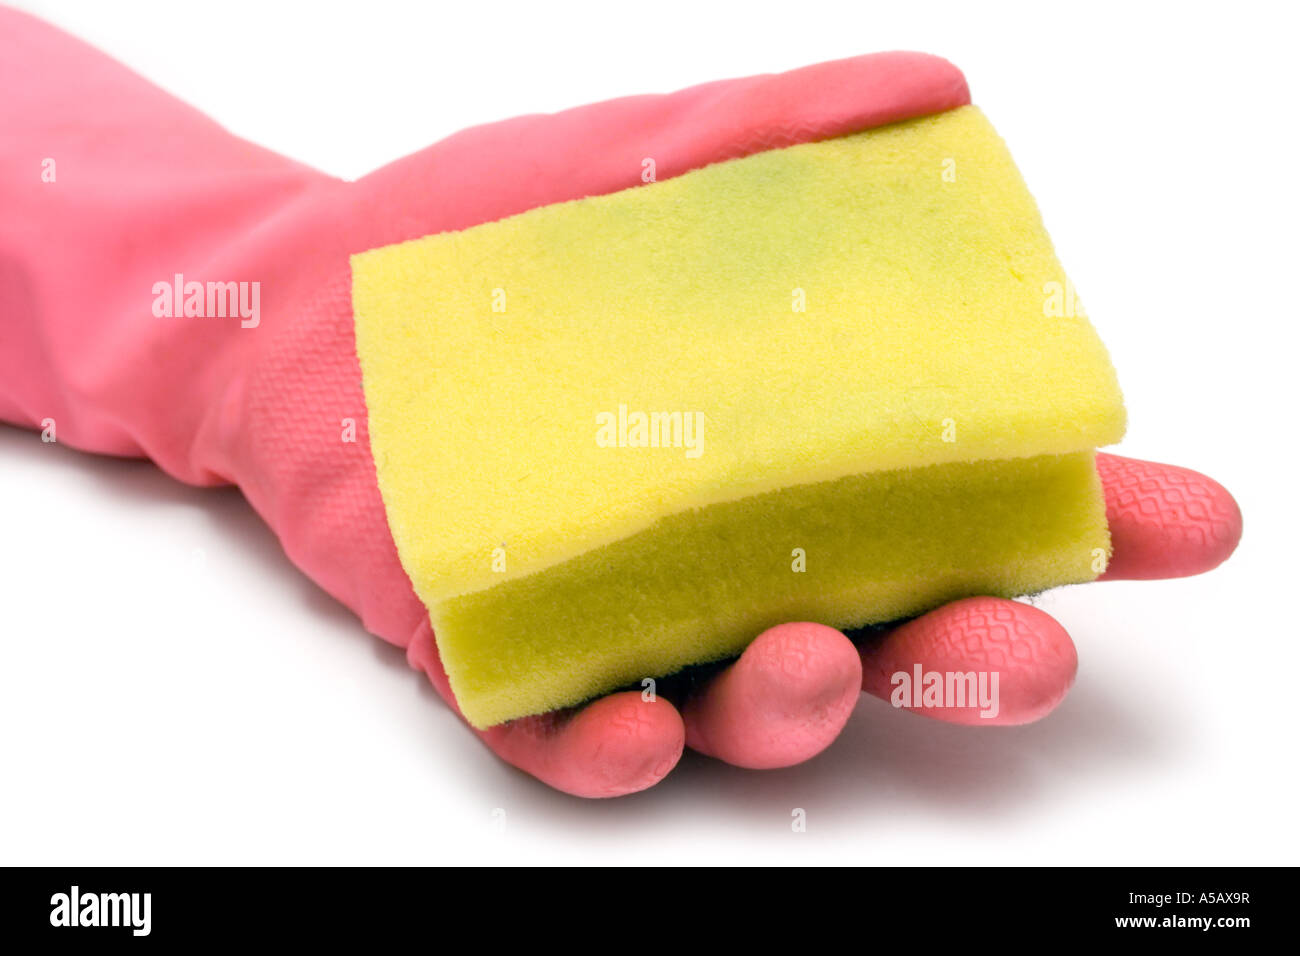 Pink gloves and a yellow cleaning sponge isolated on a white background. Stock Photo